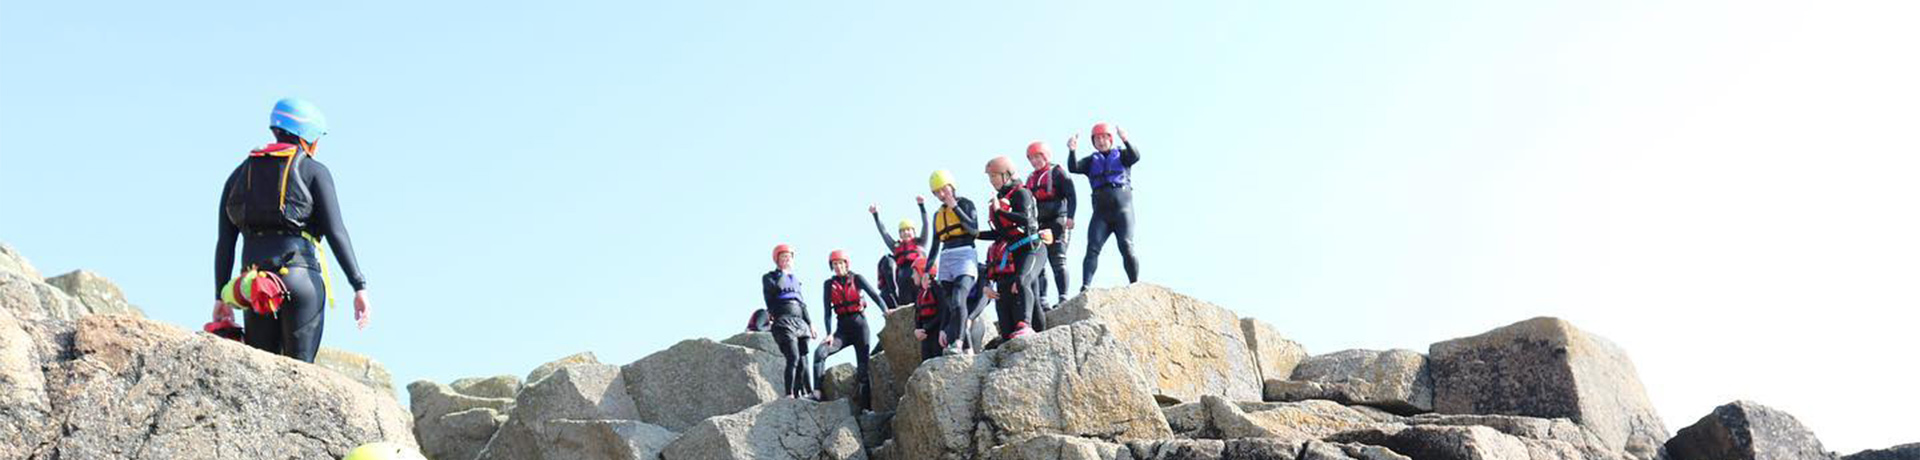 Classic goes coasteering with Global Boarders